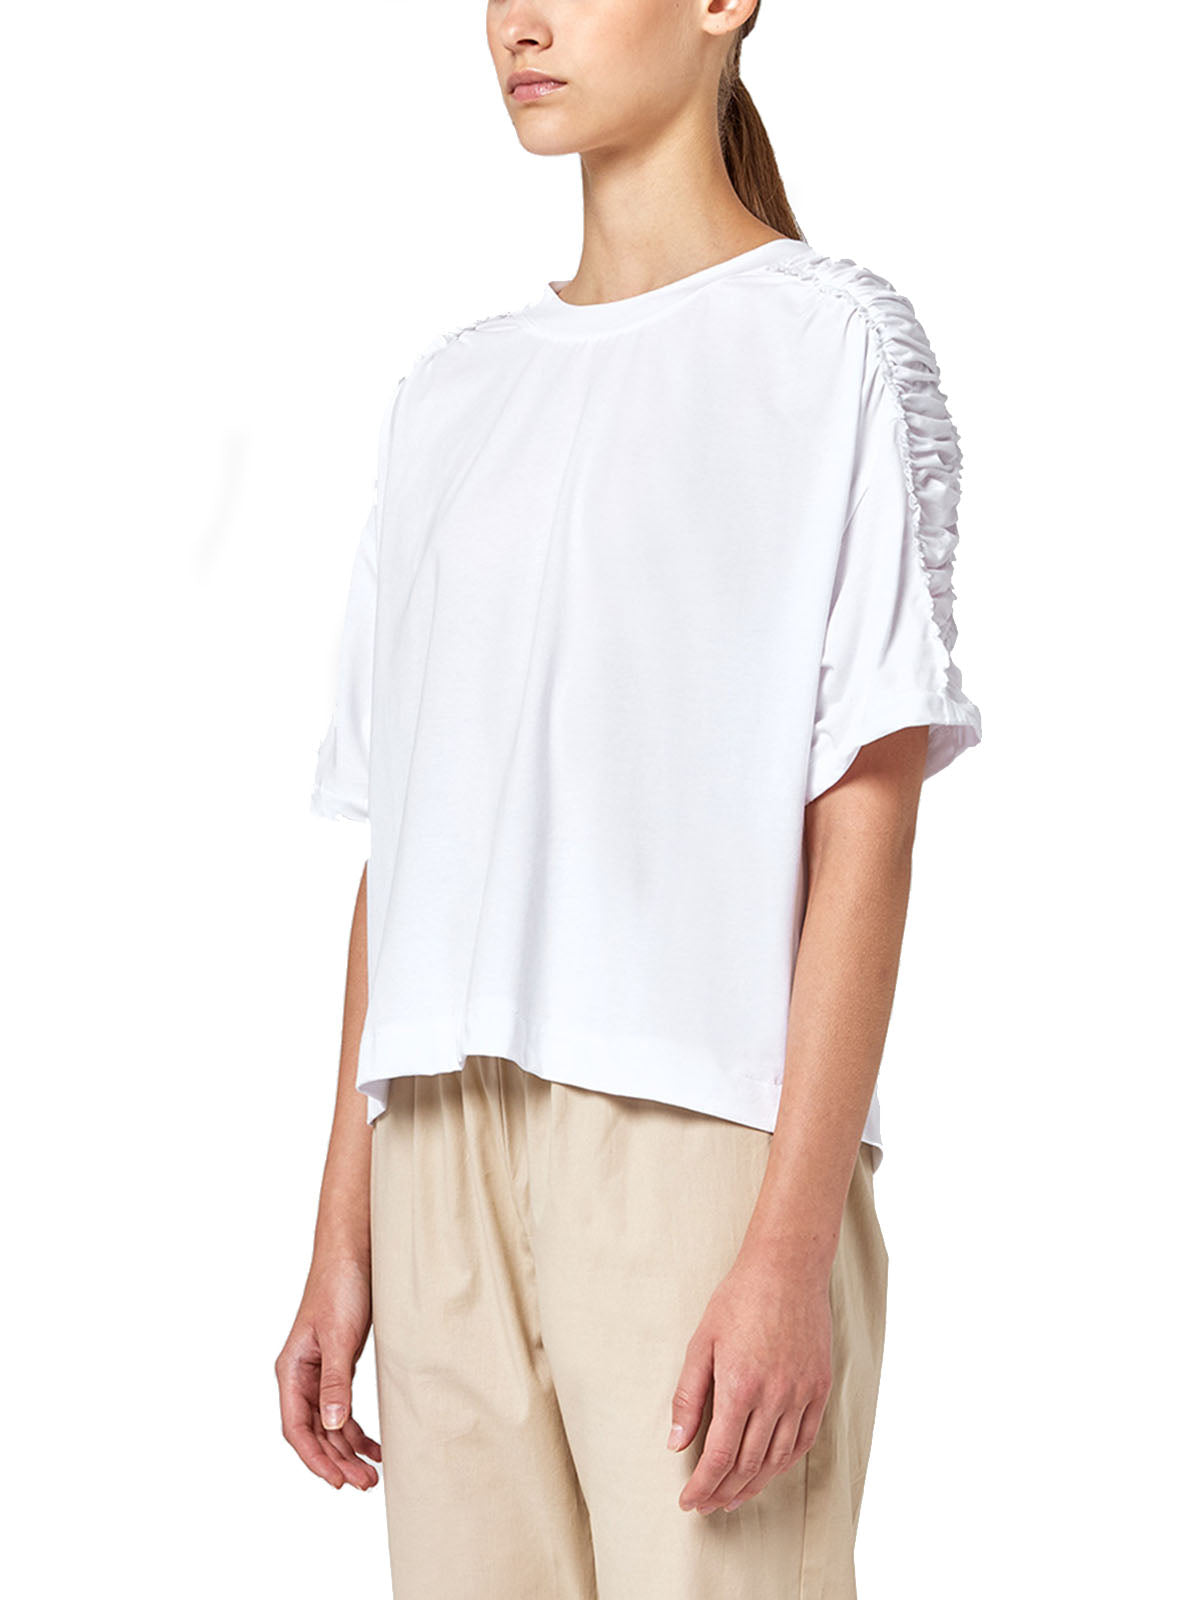 Alpha Studio Woman T-Shirt - Round Neck T-Shirt S/M Wrinkled Jersey - White